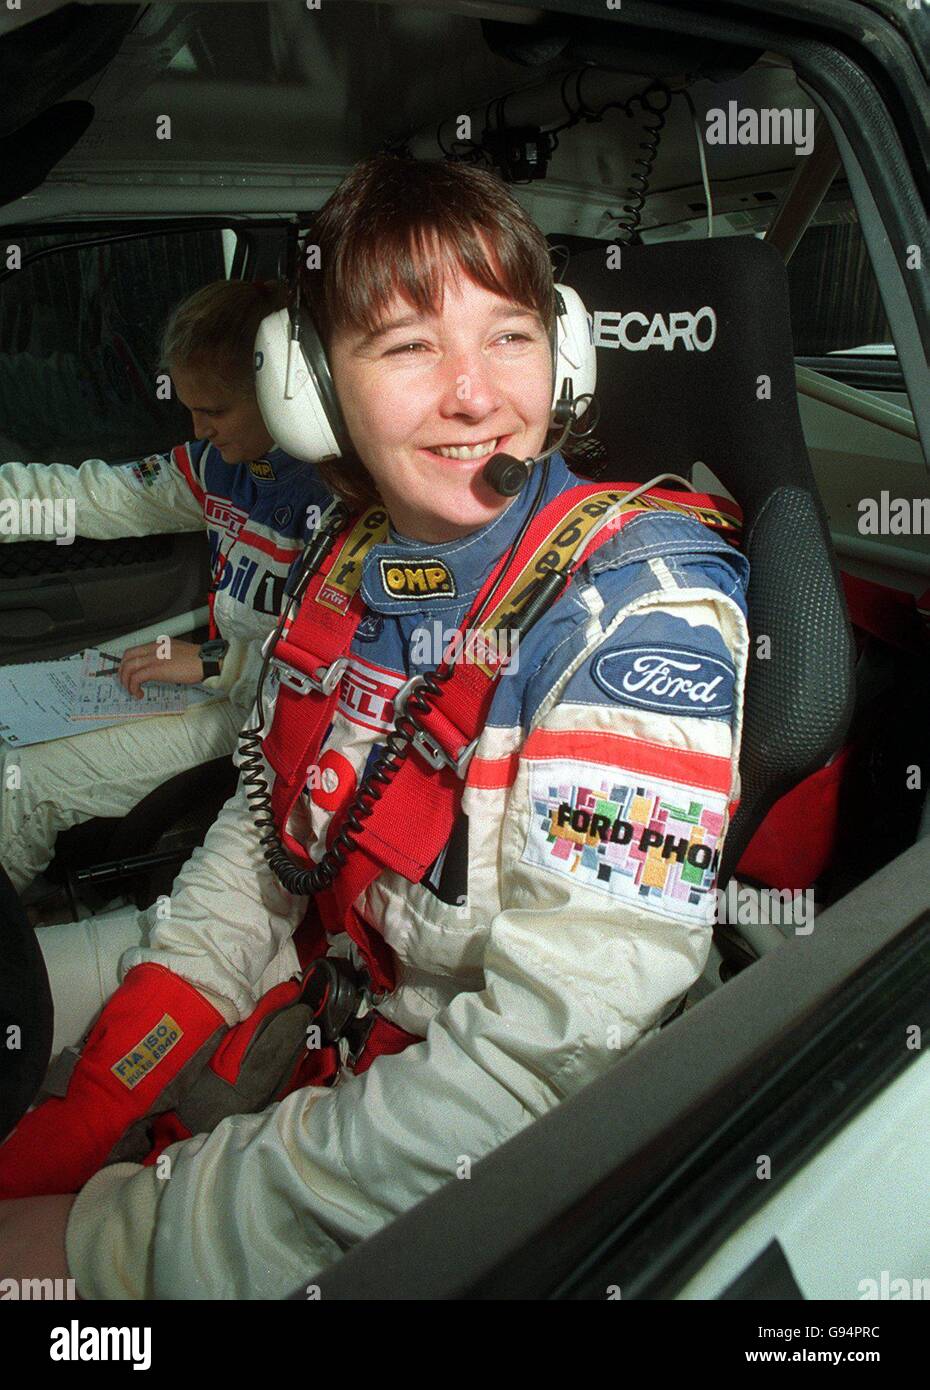 BRITAINS LOUISE AITKIN-WALKER SAT IN CAR LOMBARD RAC RALLY Z4 Stock Photo